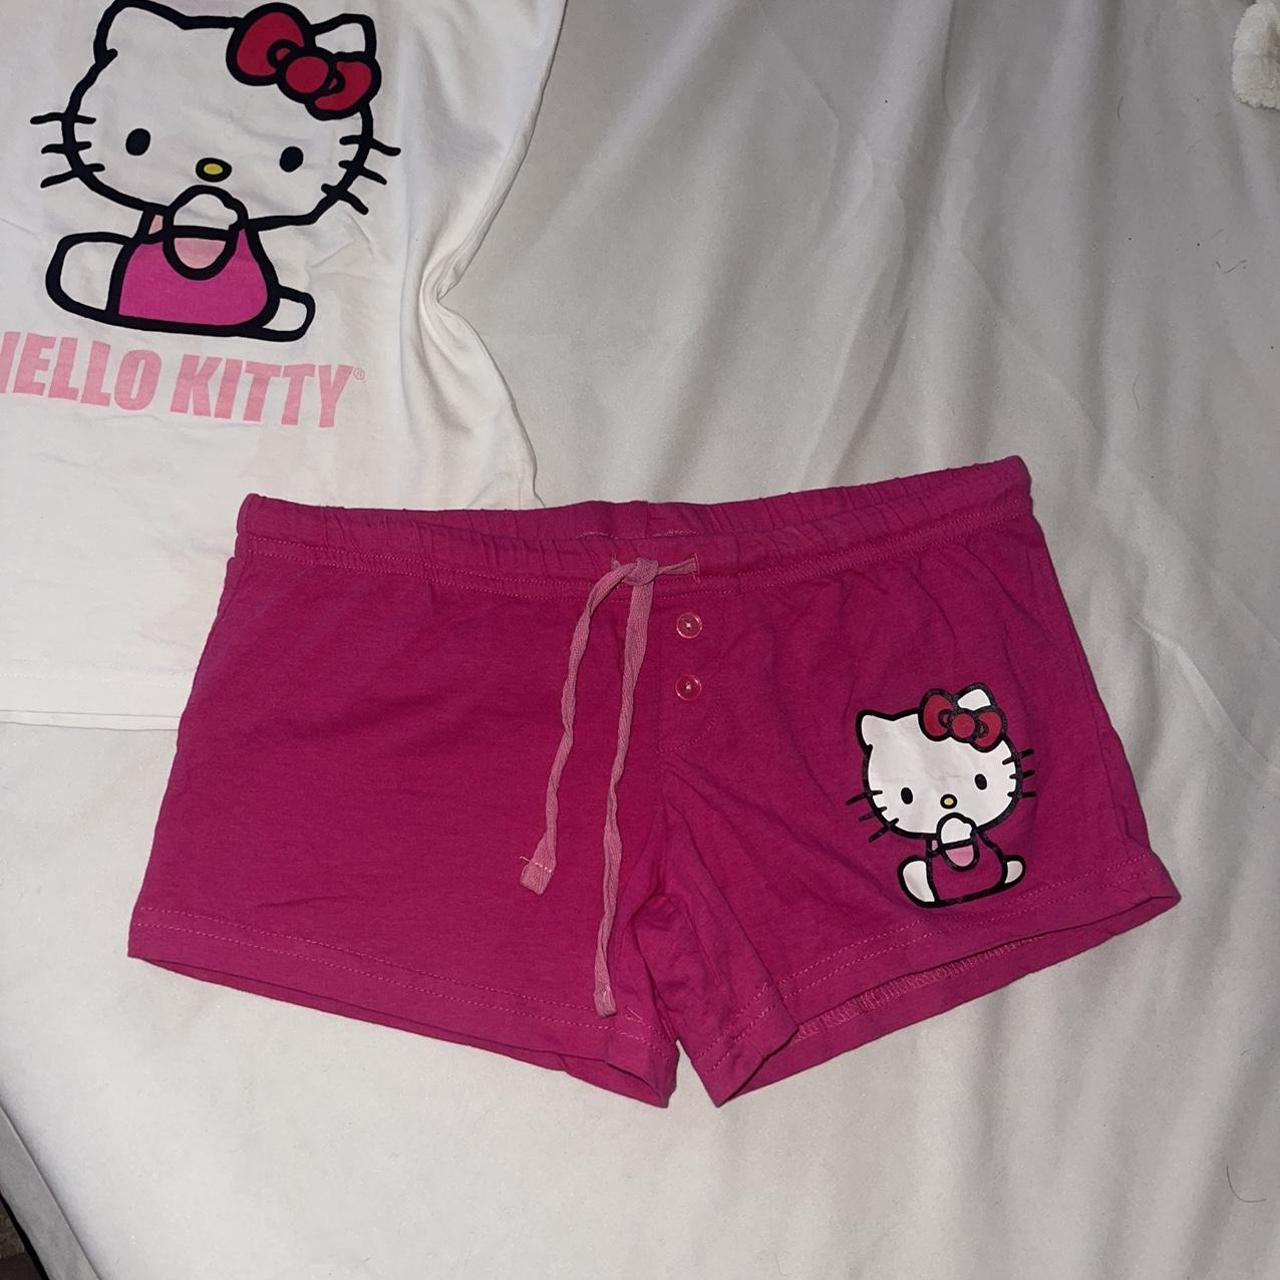 vintage early 2000 hello kitty lounge set 💕💋 size S... - Depop